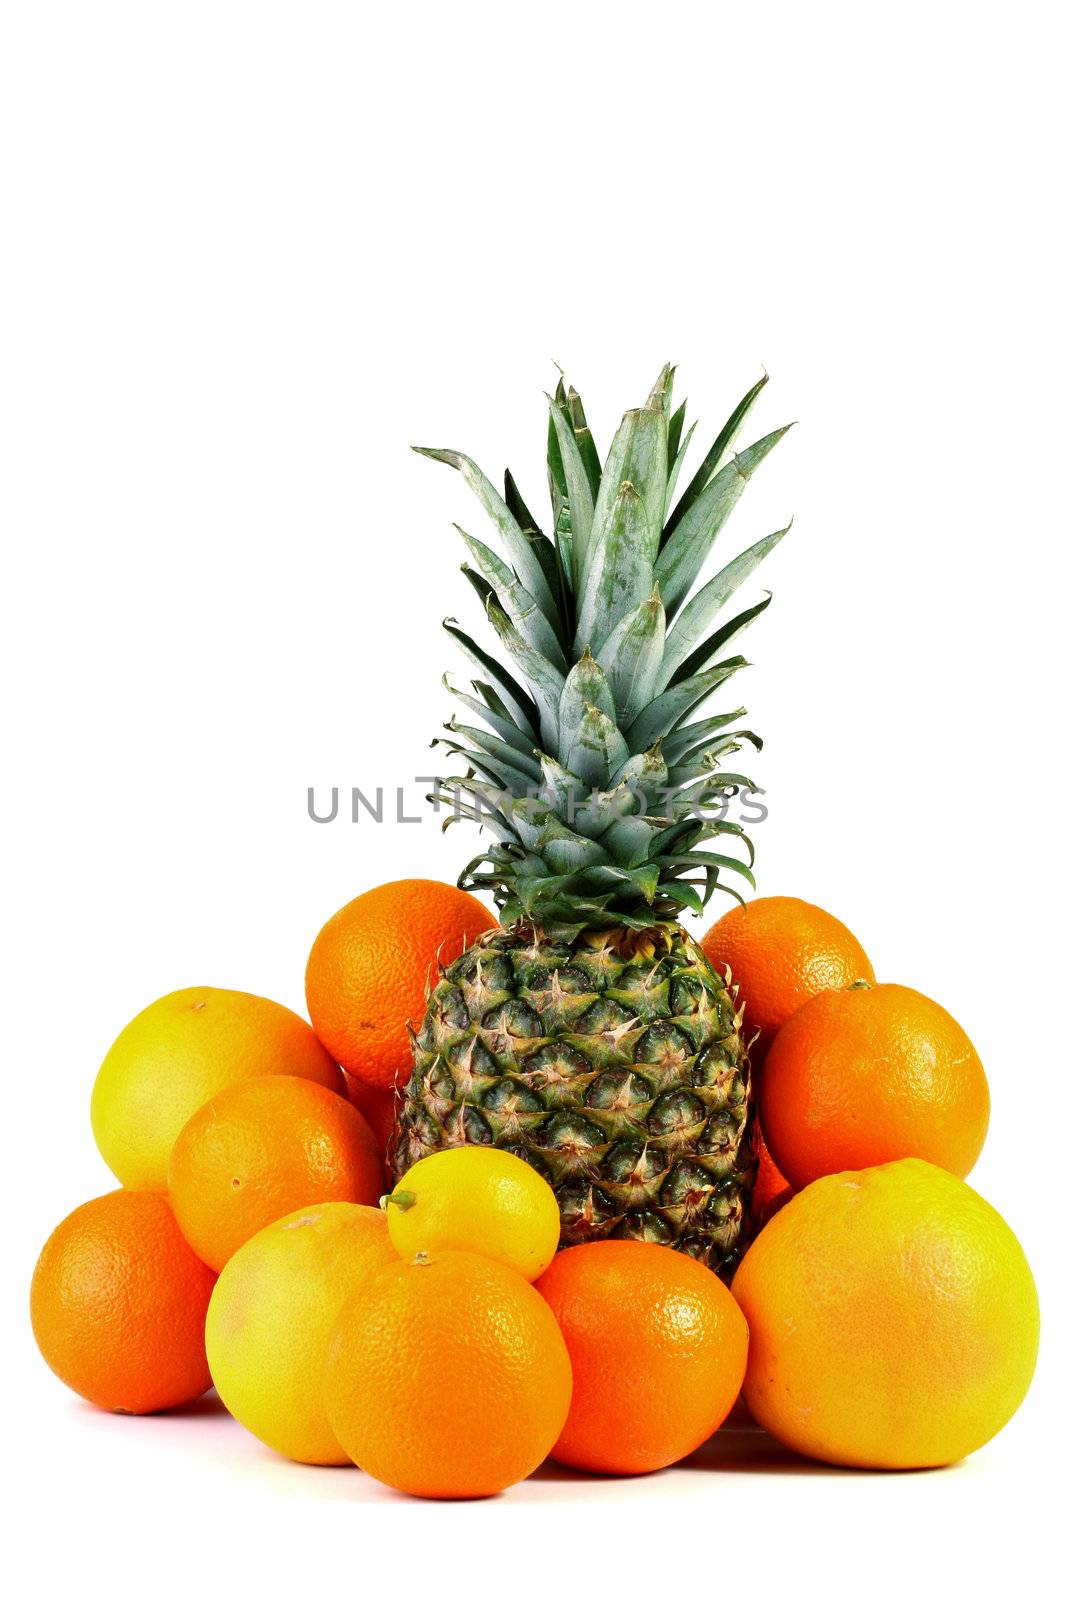 Pineapple with a lemon, oranges and grapefruits.